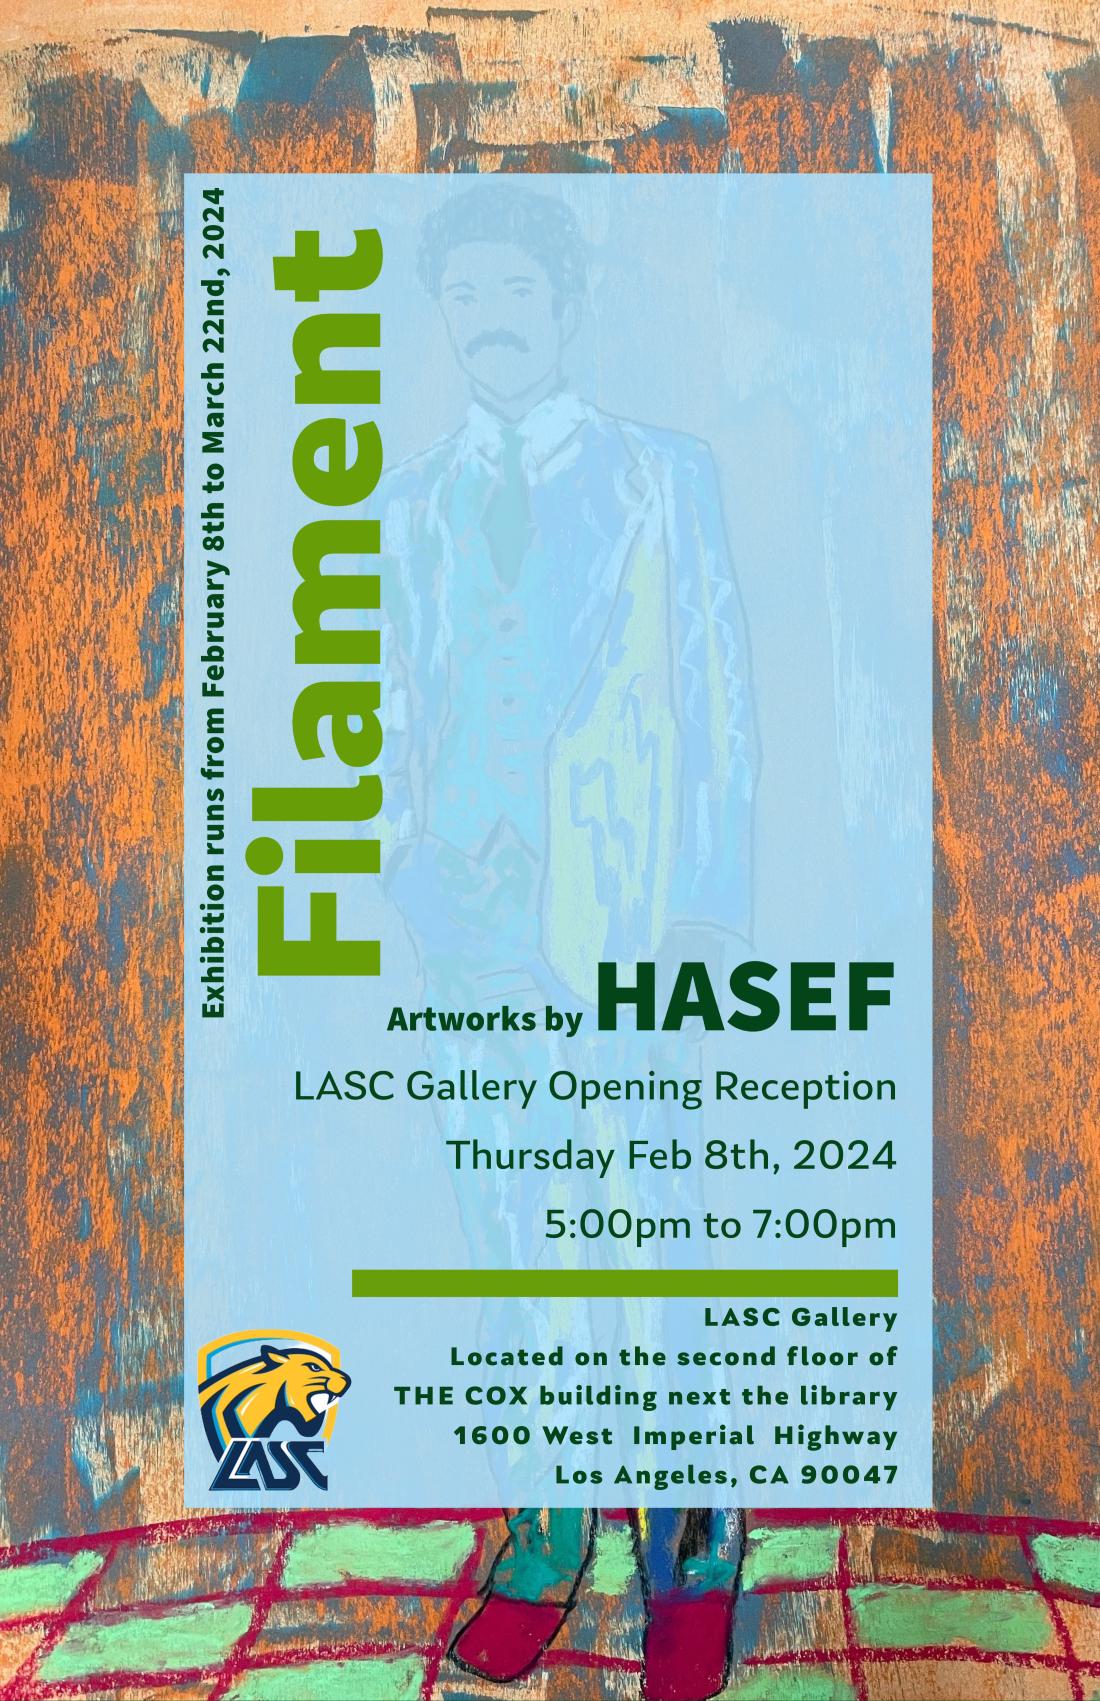 LASC adjunct professor Jamaal Hasef Tolbert hosted an opening reception for his solo exhibit at the LASC Gallery